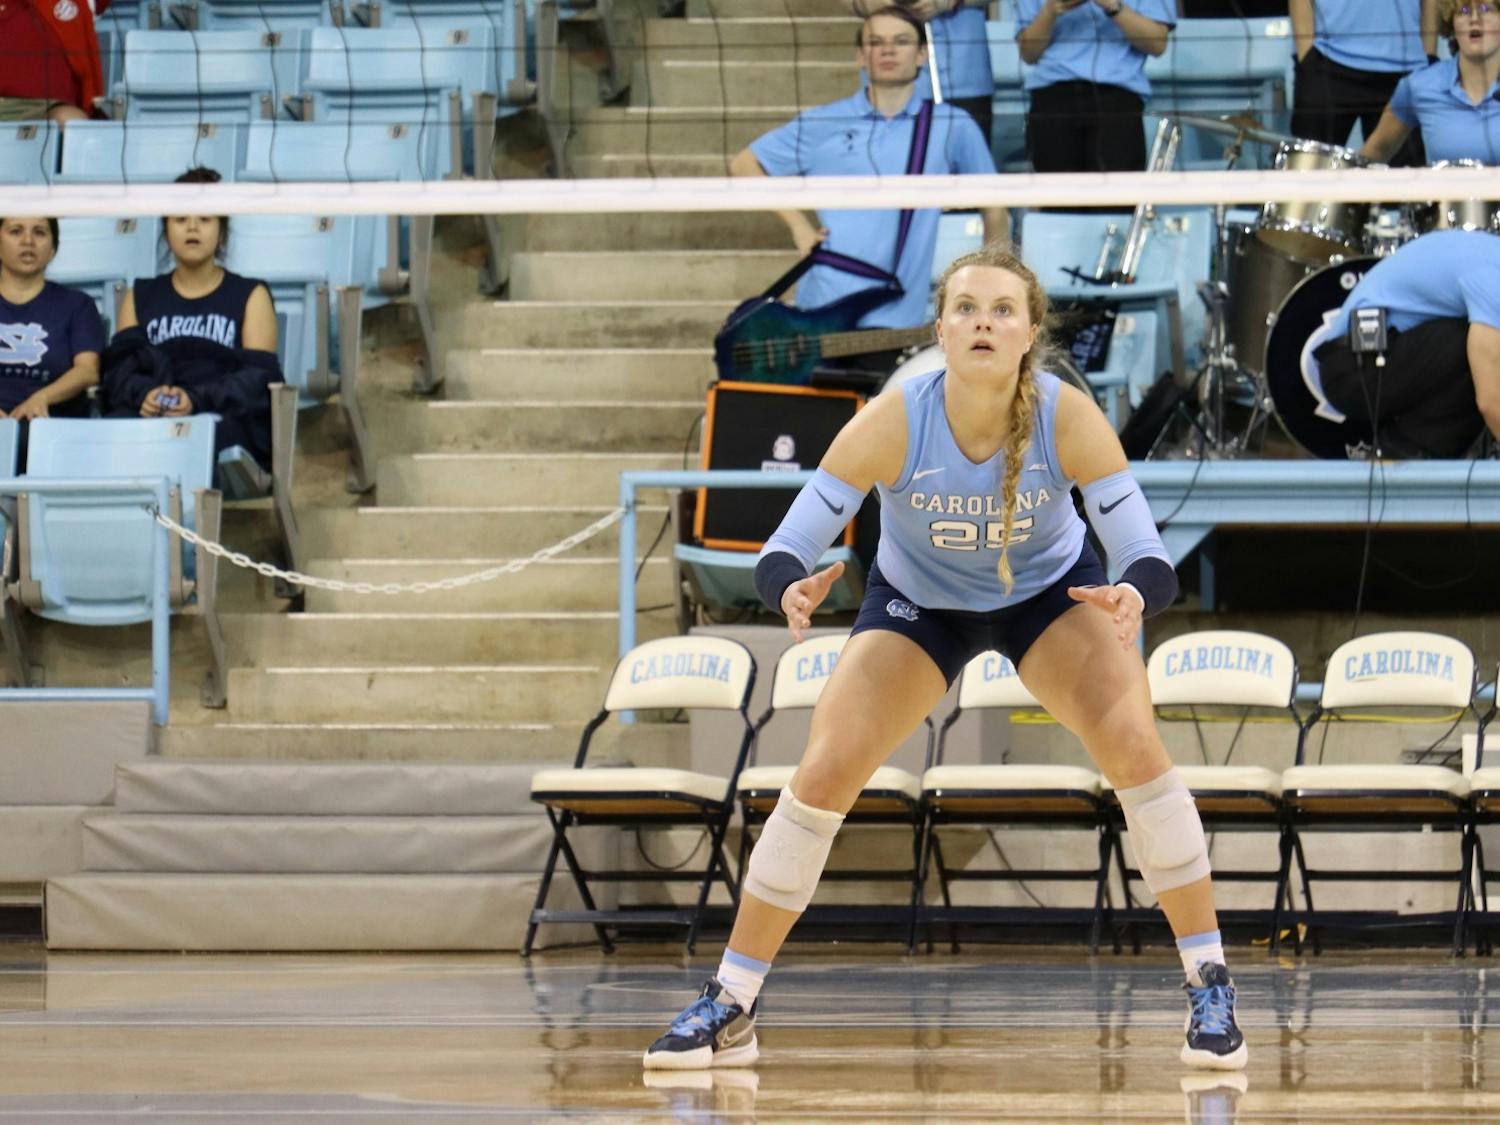 UNC first-year libero/defensive specialist Maddy May (25) prepares to hit the ball during the volleyball match against Georgia Tech on Friday, Oct. 28, 2022, at Carmichael Arena. UNC lost 3-1.